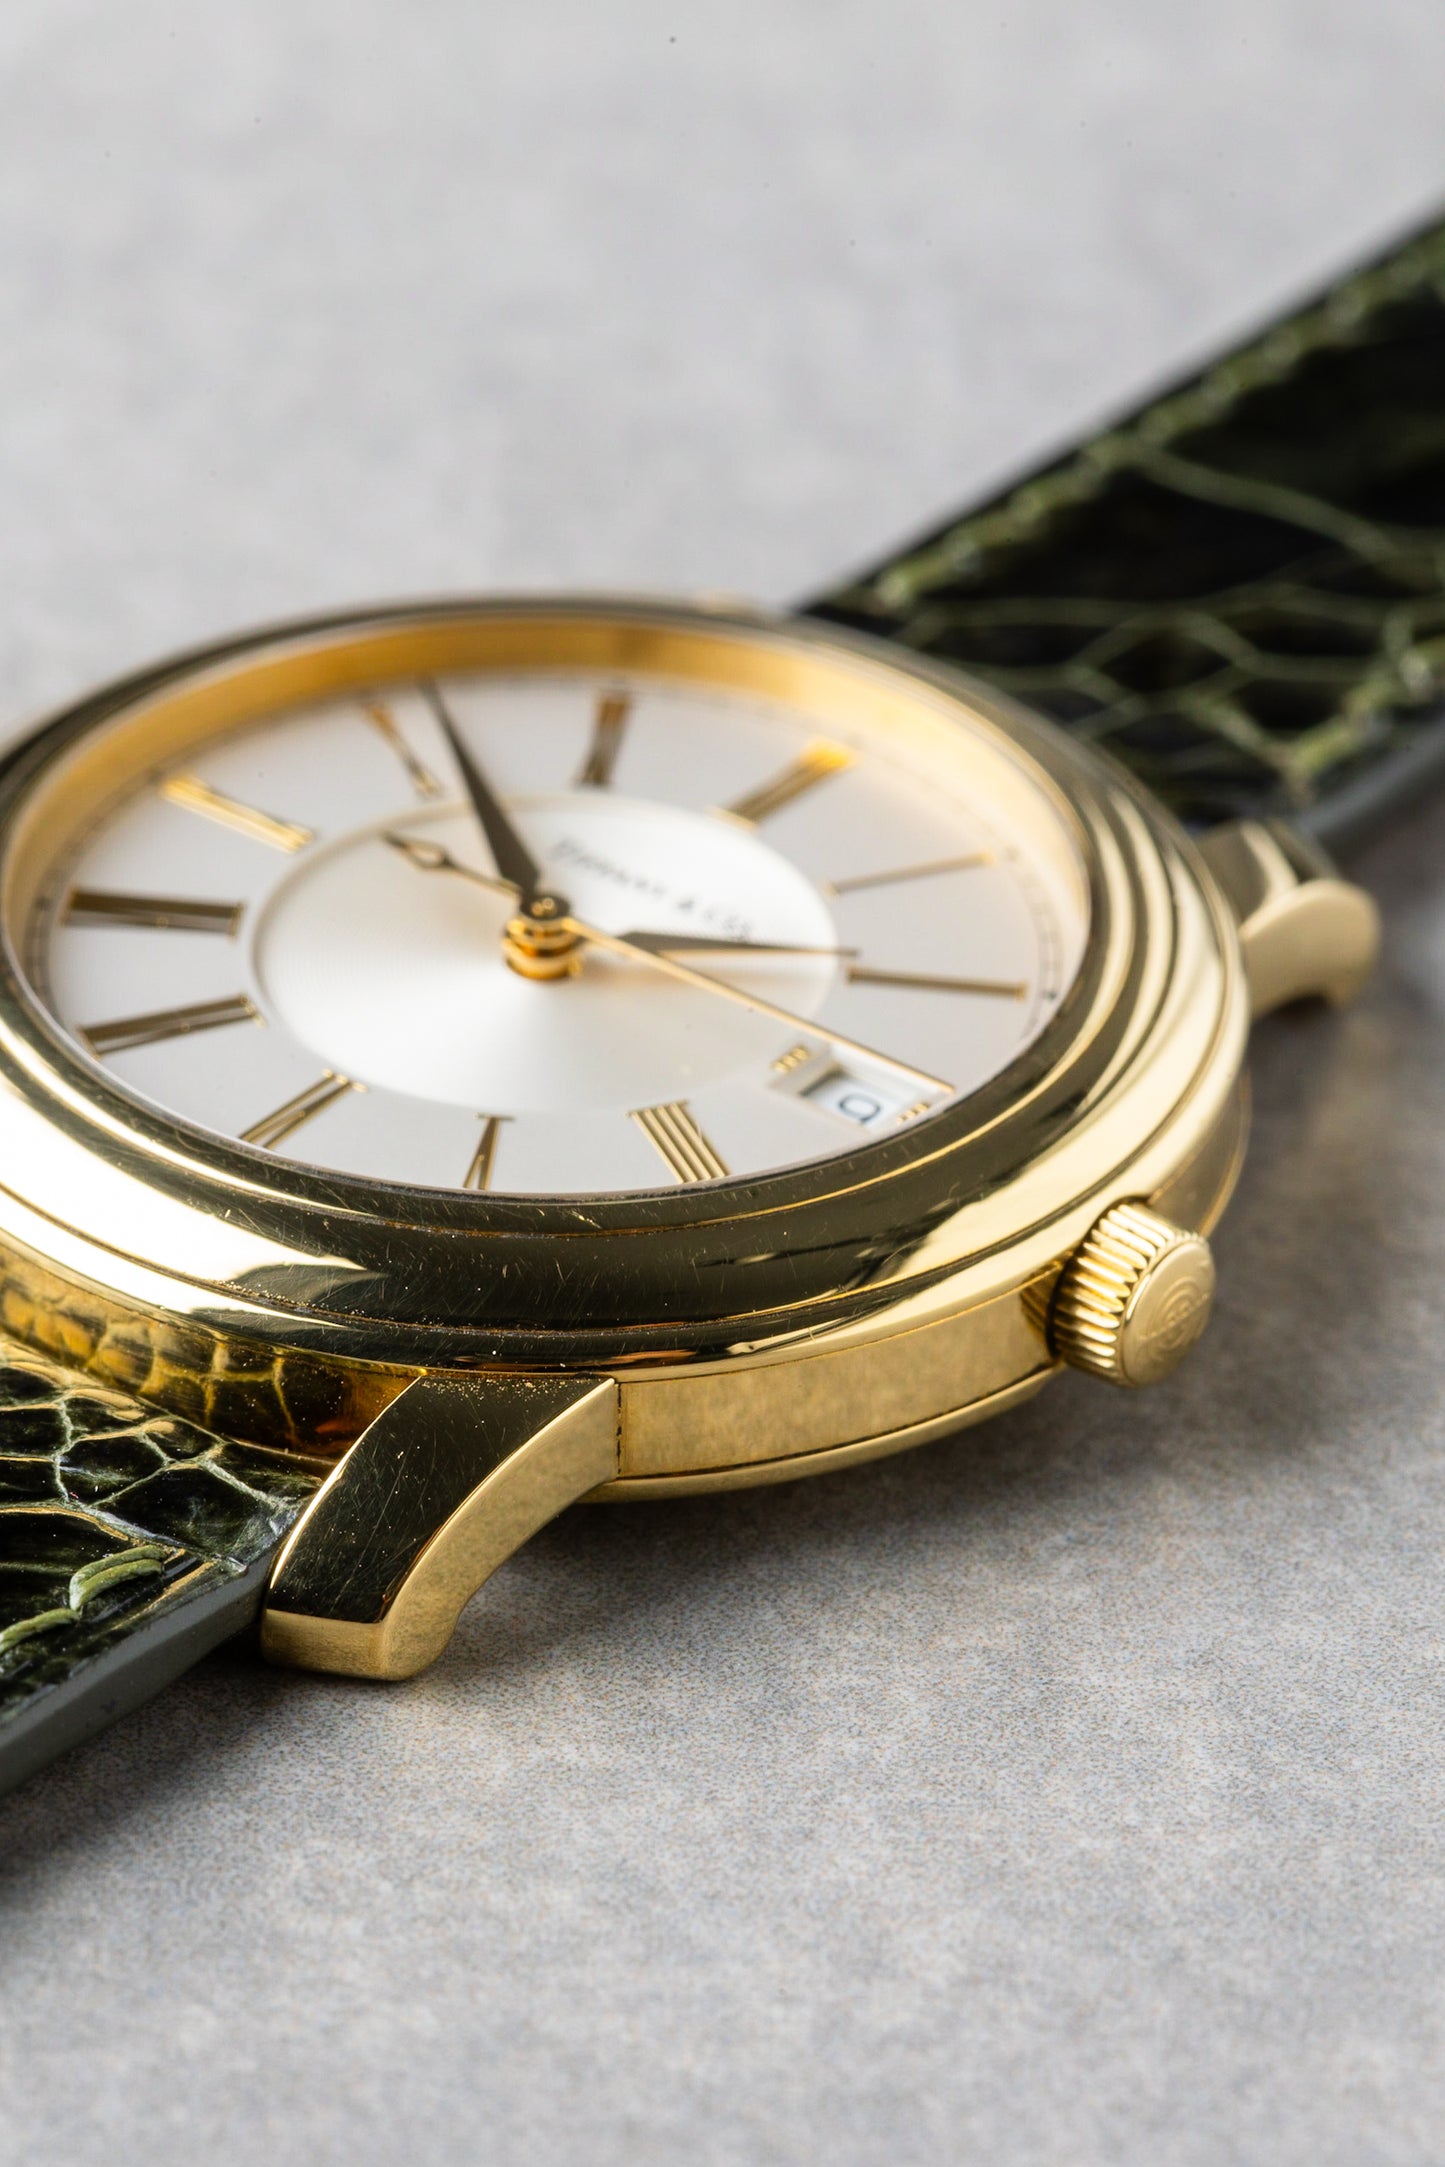 2000s Tiffany & Co Atlas Round Automatic 18K Solid Gold